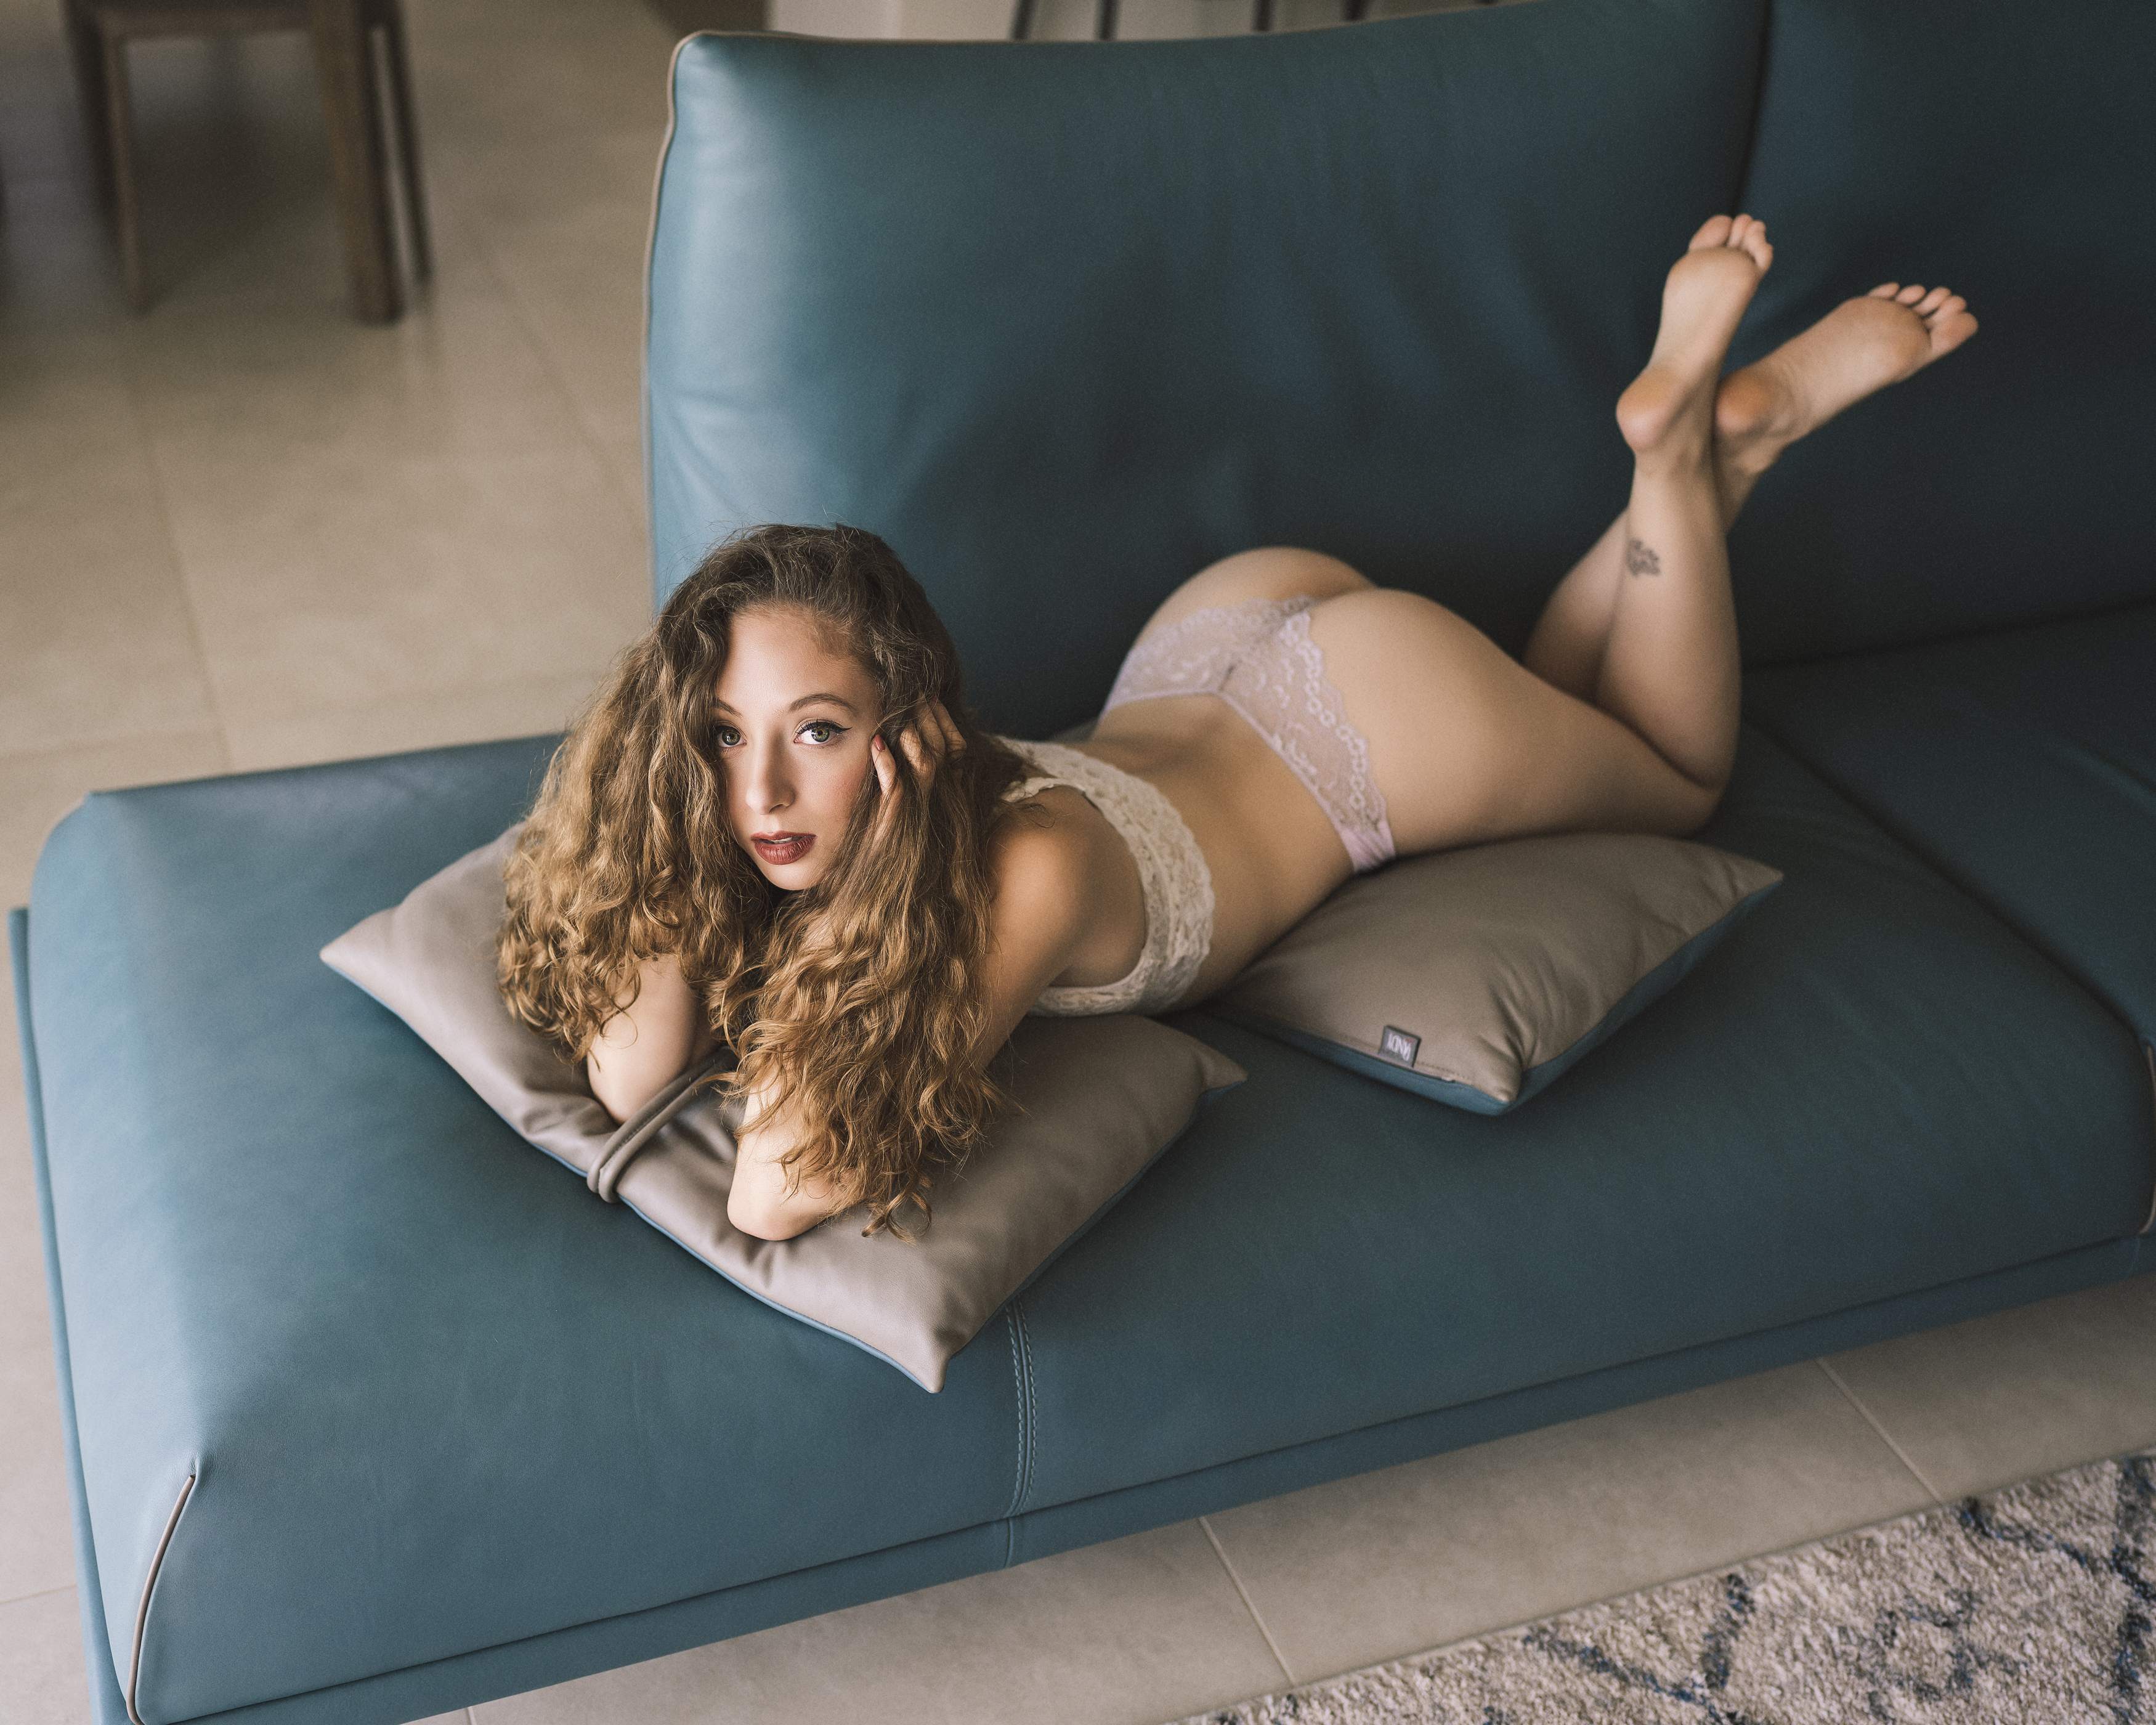 beautiful woman, beauty, fashion, female, femininity, girl, grace, individuality, indoors, lifestyles, lingerie, looking at camera, one person, portrait, pose, relaxation, seductive women, sensuality, sofa, tattoo, underwear, young women, Alex Tsarfin